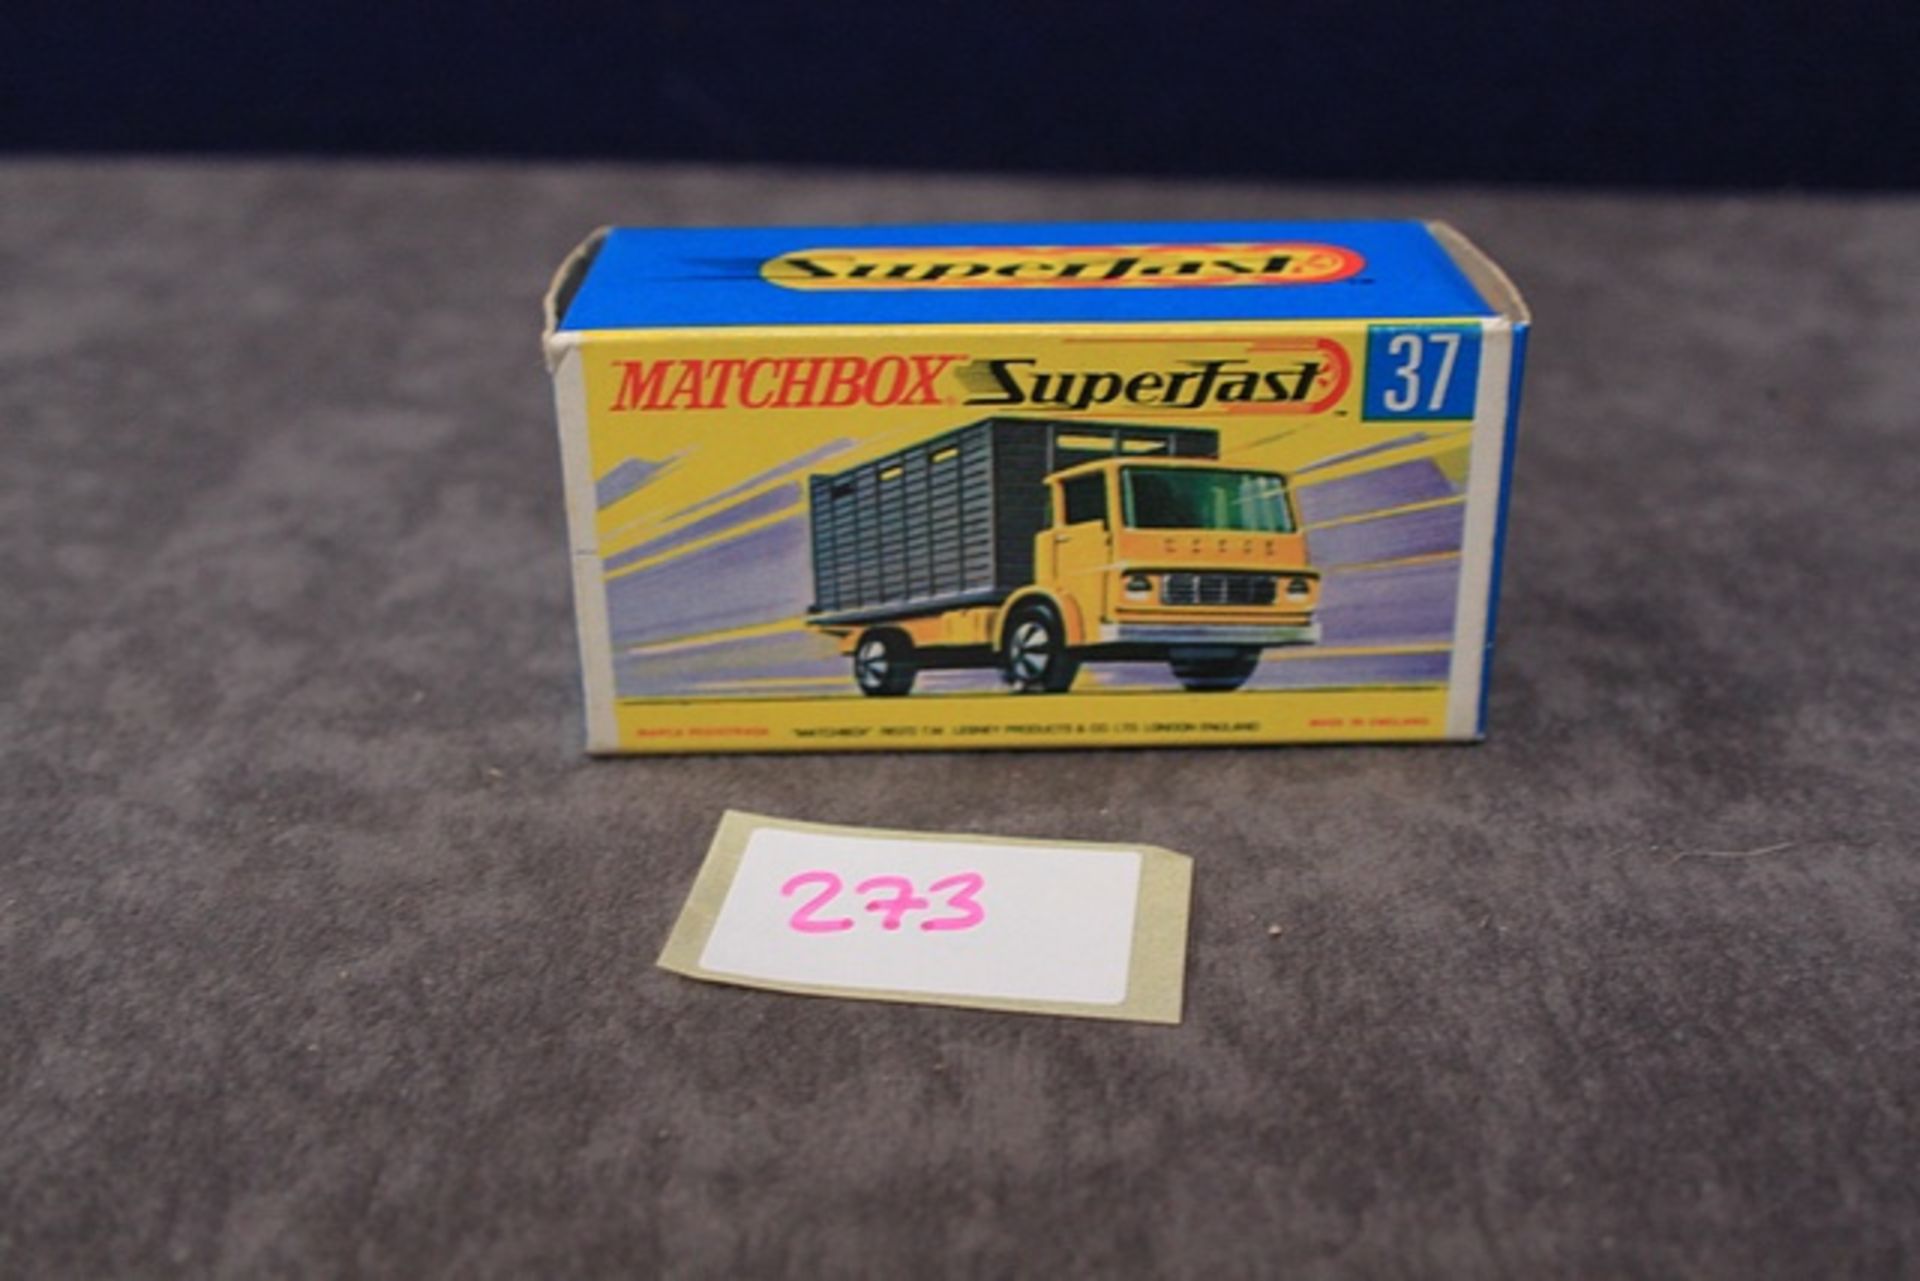 Mint Matchbox Superfast Diecast # 37 Cattle Truck In Yellow With Cattle In Crisp Box - Image 3 of 3